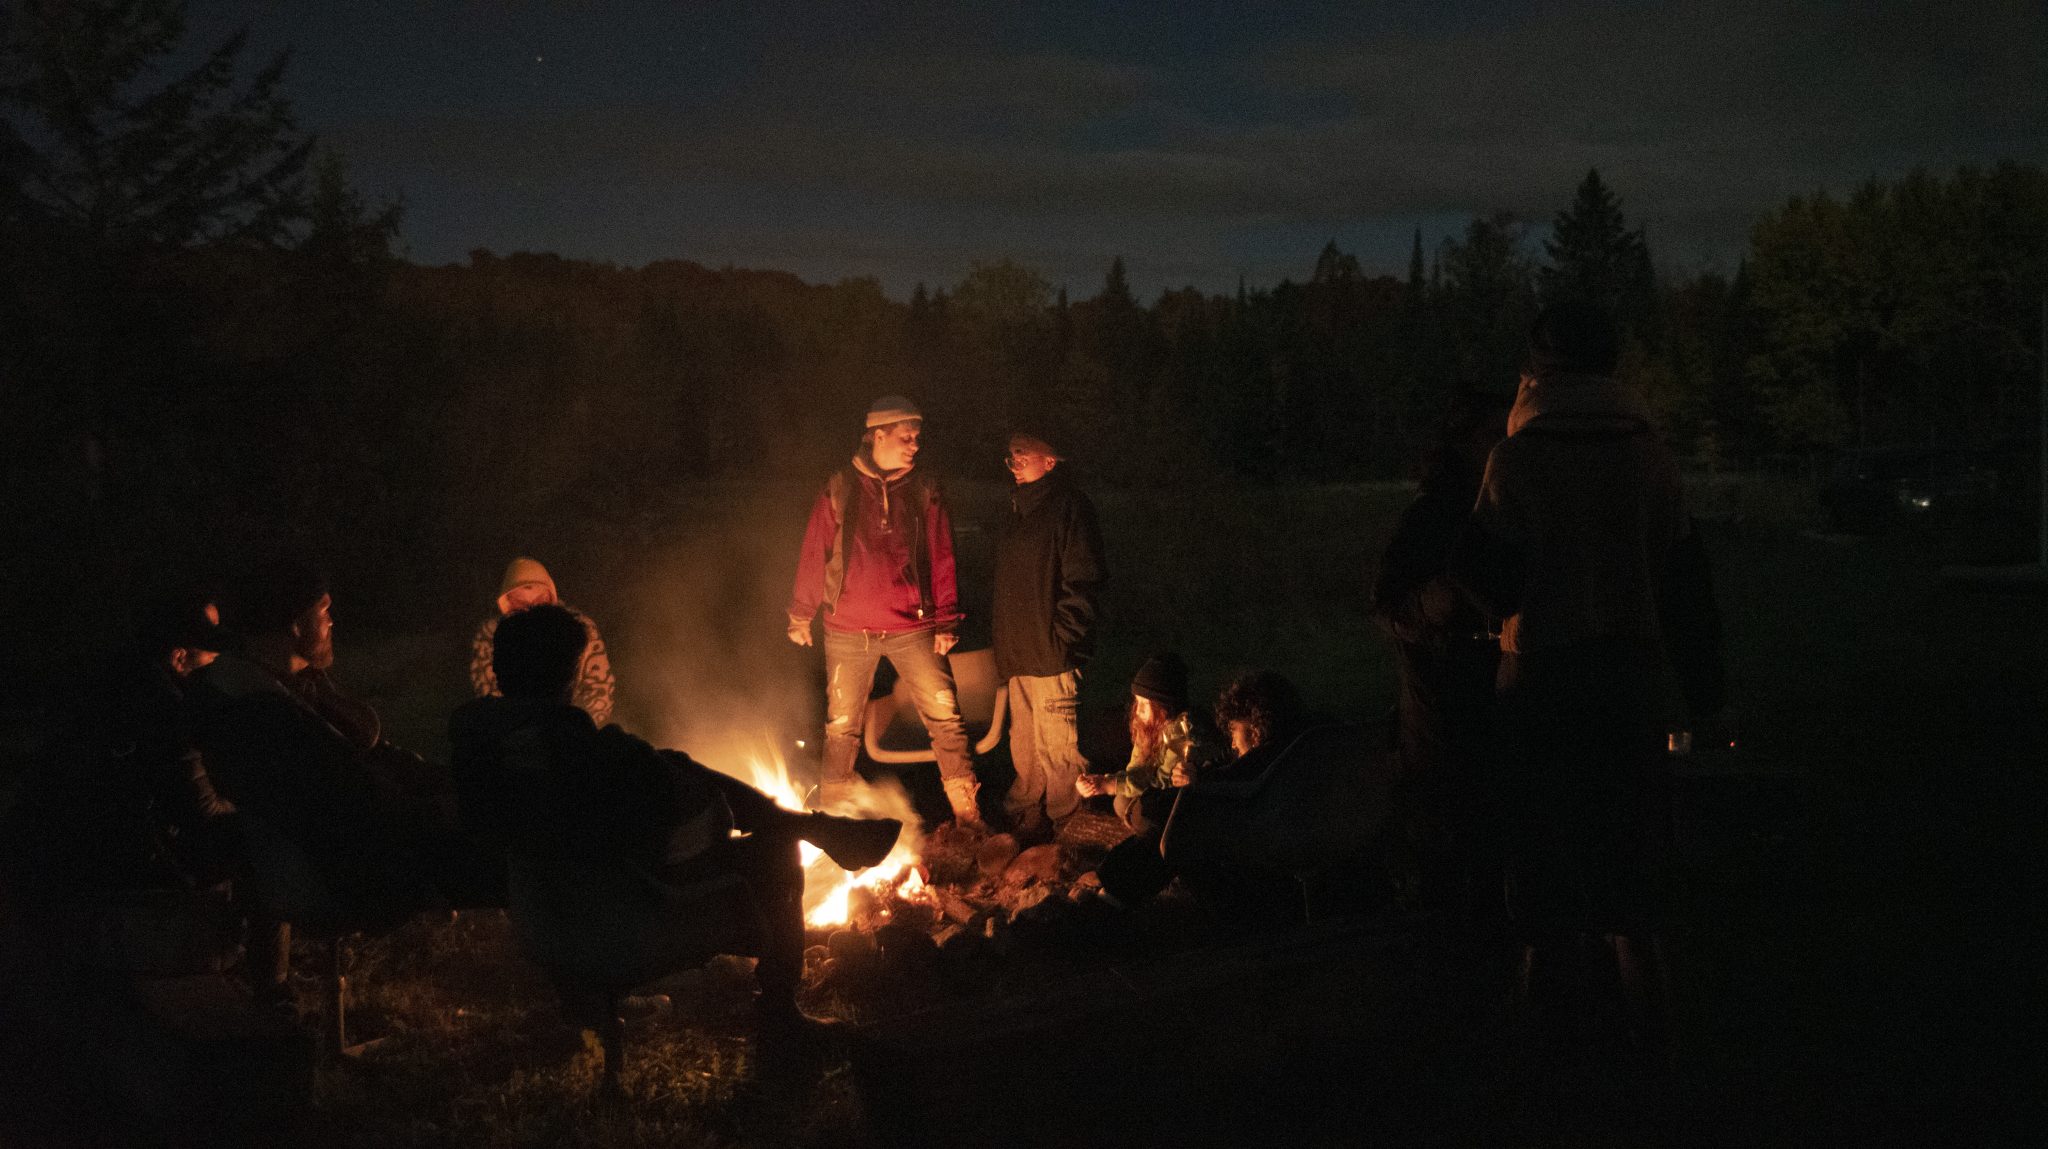 artists gathered around a fire at night during the residency